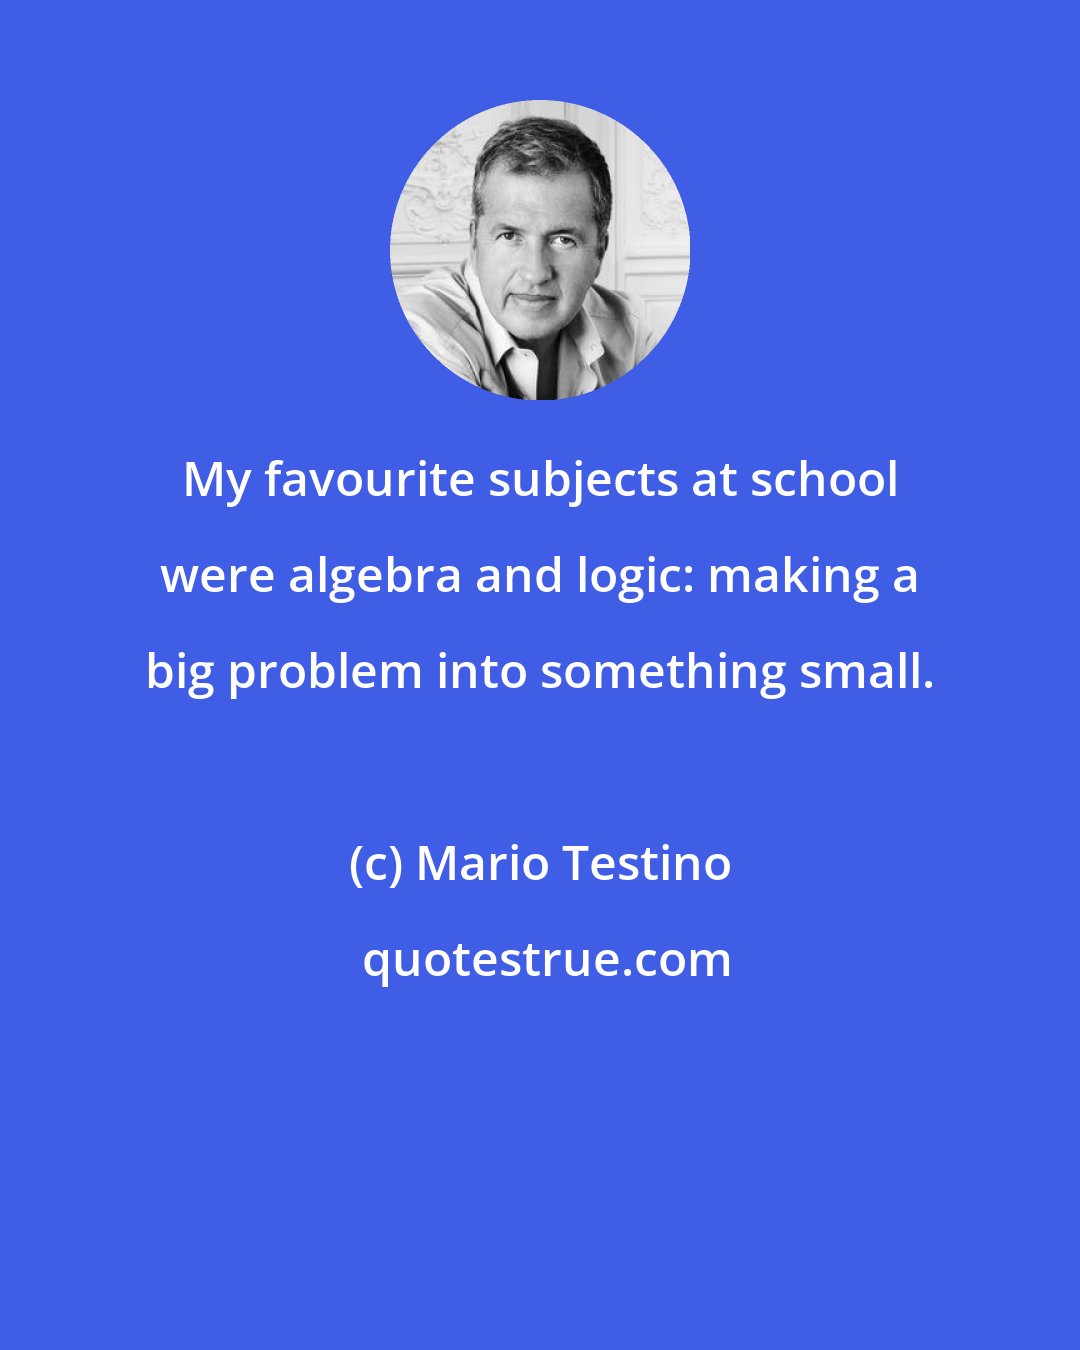 Mario Testino: My favourite subjects at school were algebra and logic: making a big problem into something small.